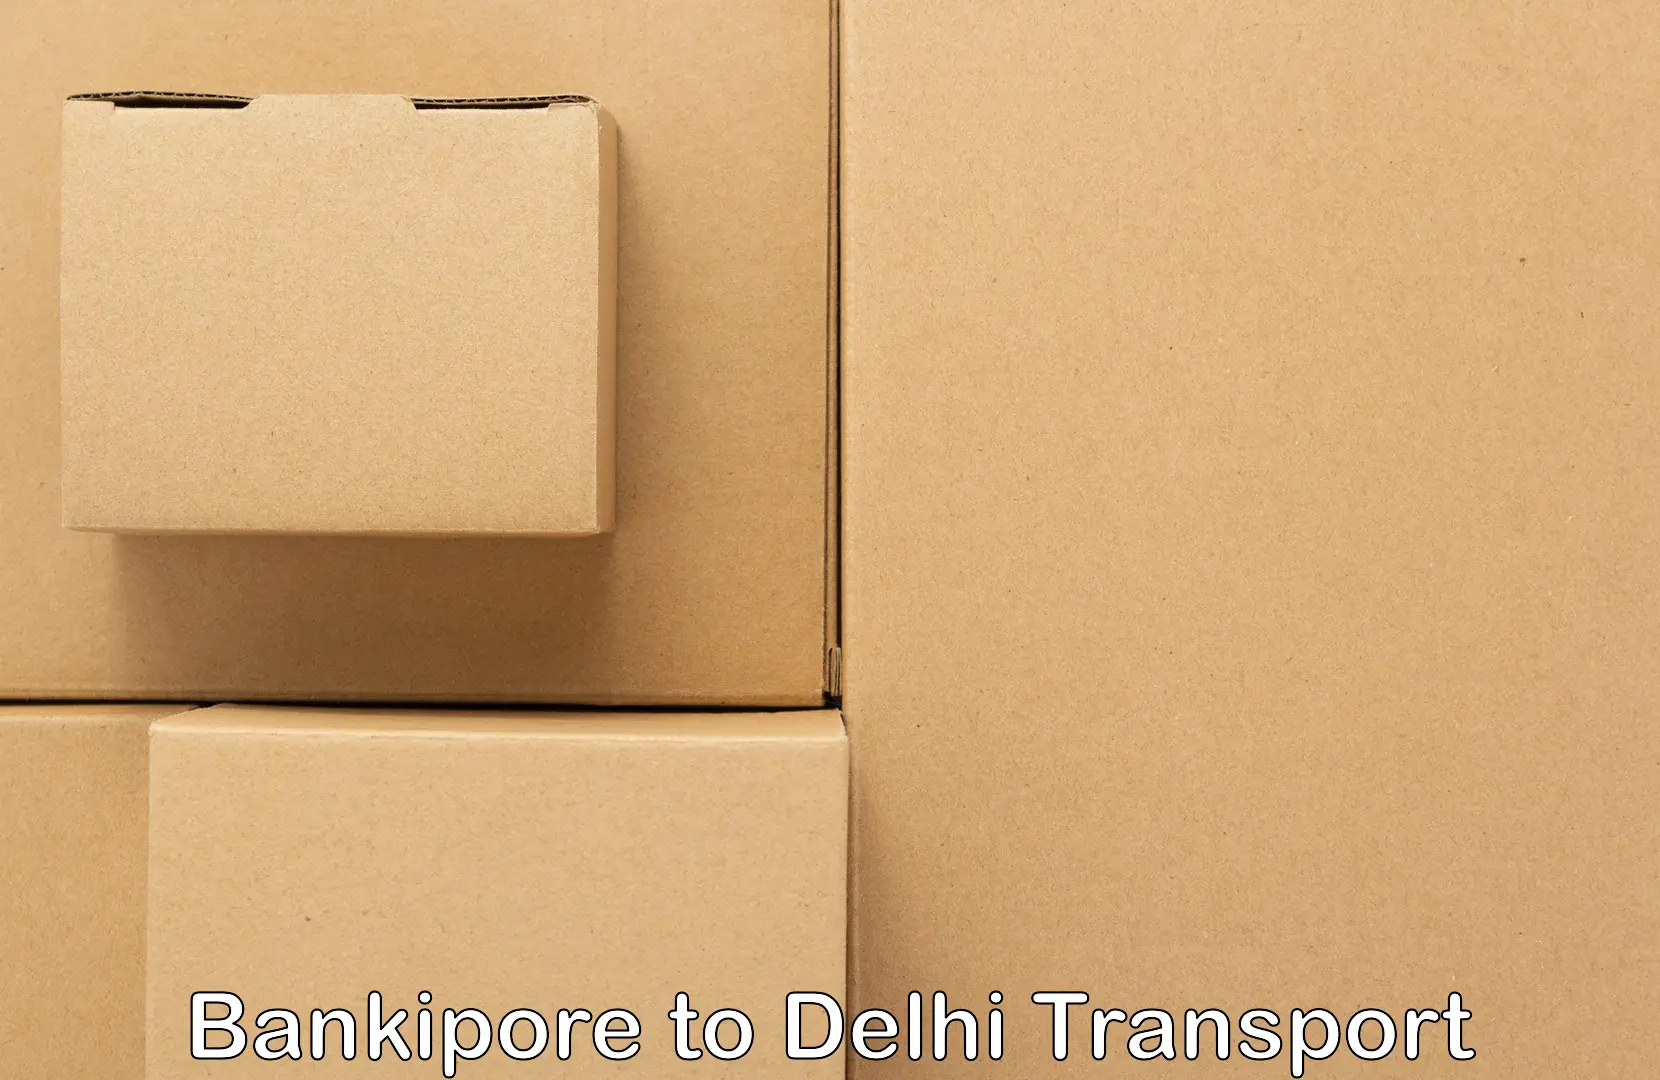 Daily transport service Bankipore to NCR